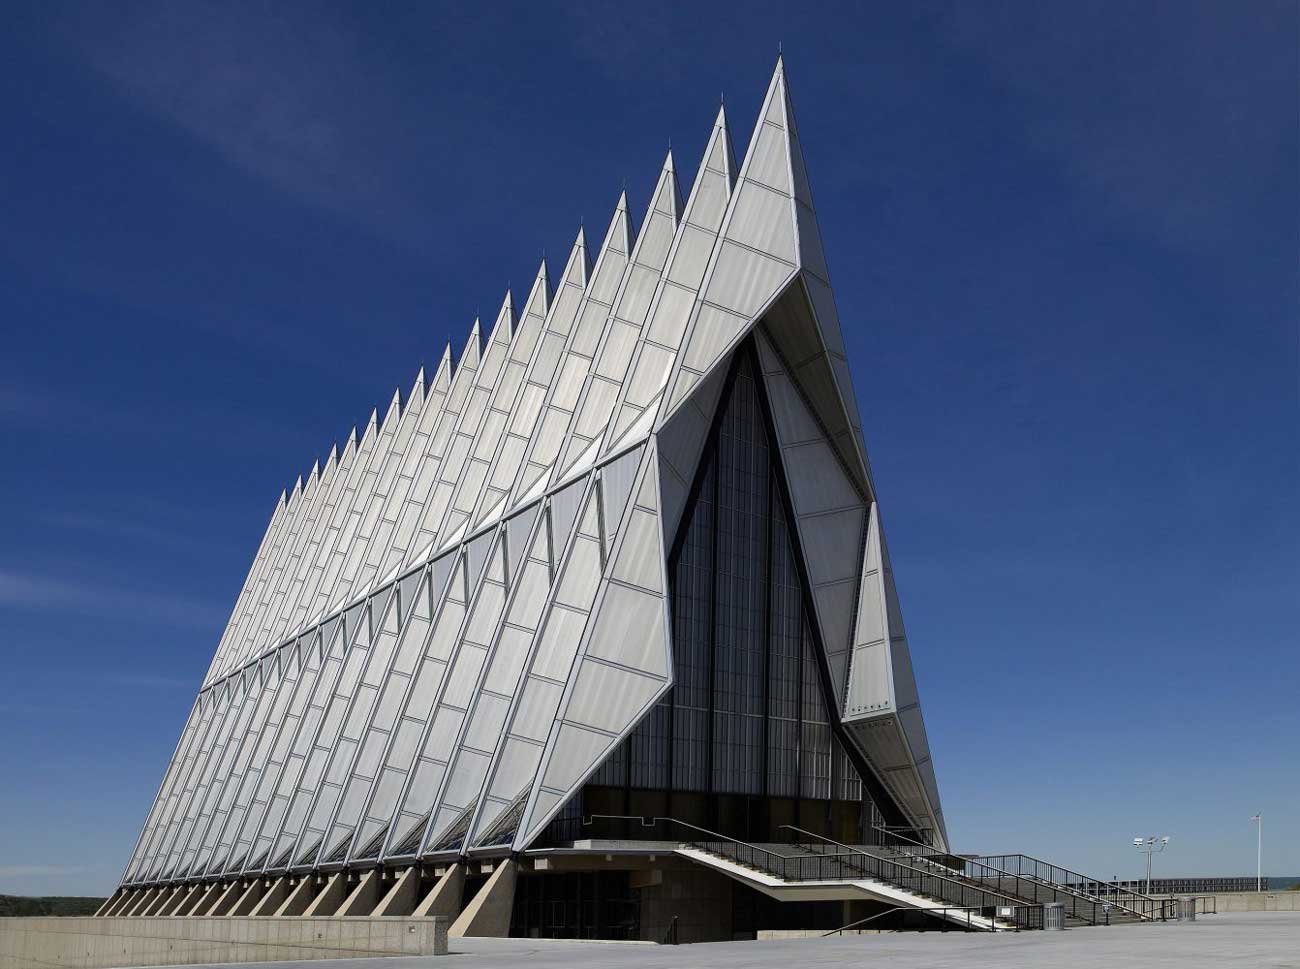 Skidmore, owings & merrill: cadet chapel, colorado springs, usa - distinctive united states air force academy building, completed in 1962. © carol m. Highsmith